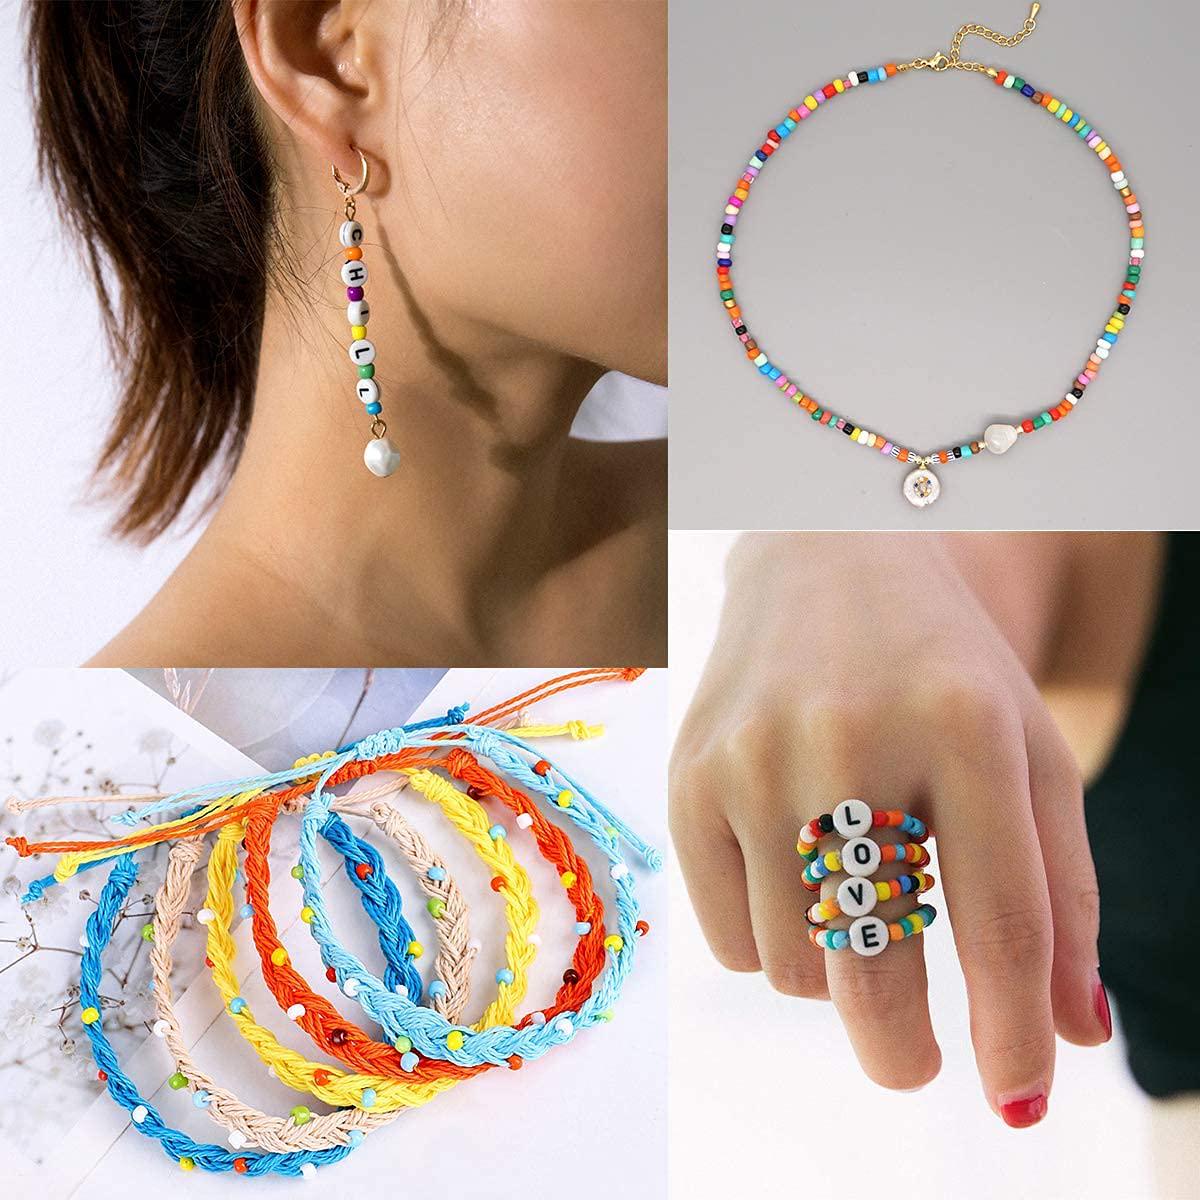 EuTengHao, EuTengHao 8400pcs Multicolor Glass Seed Beads Small Craft Beads Kit for DIY Bracelet Necklaces Handicrafts Earring Jewelry Making Supplies with Two Crystal String (4mm, 350Per Color, 24 Colors)